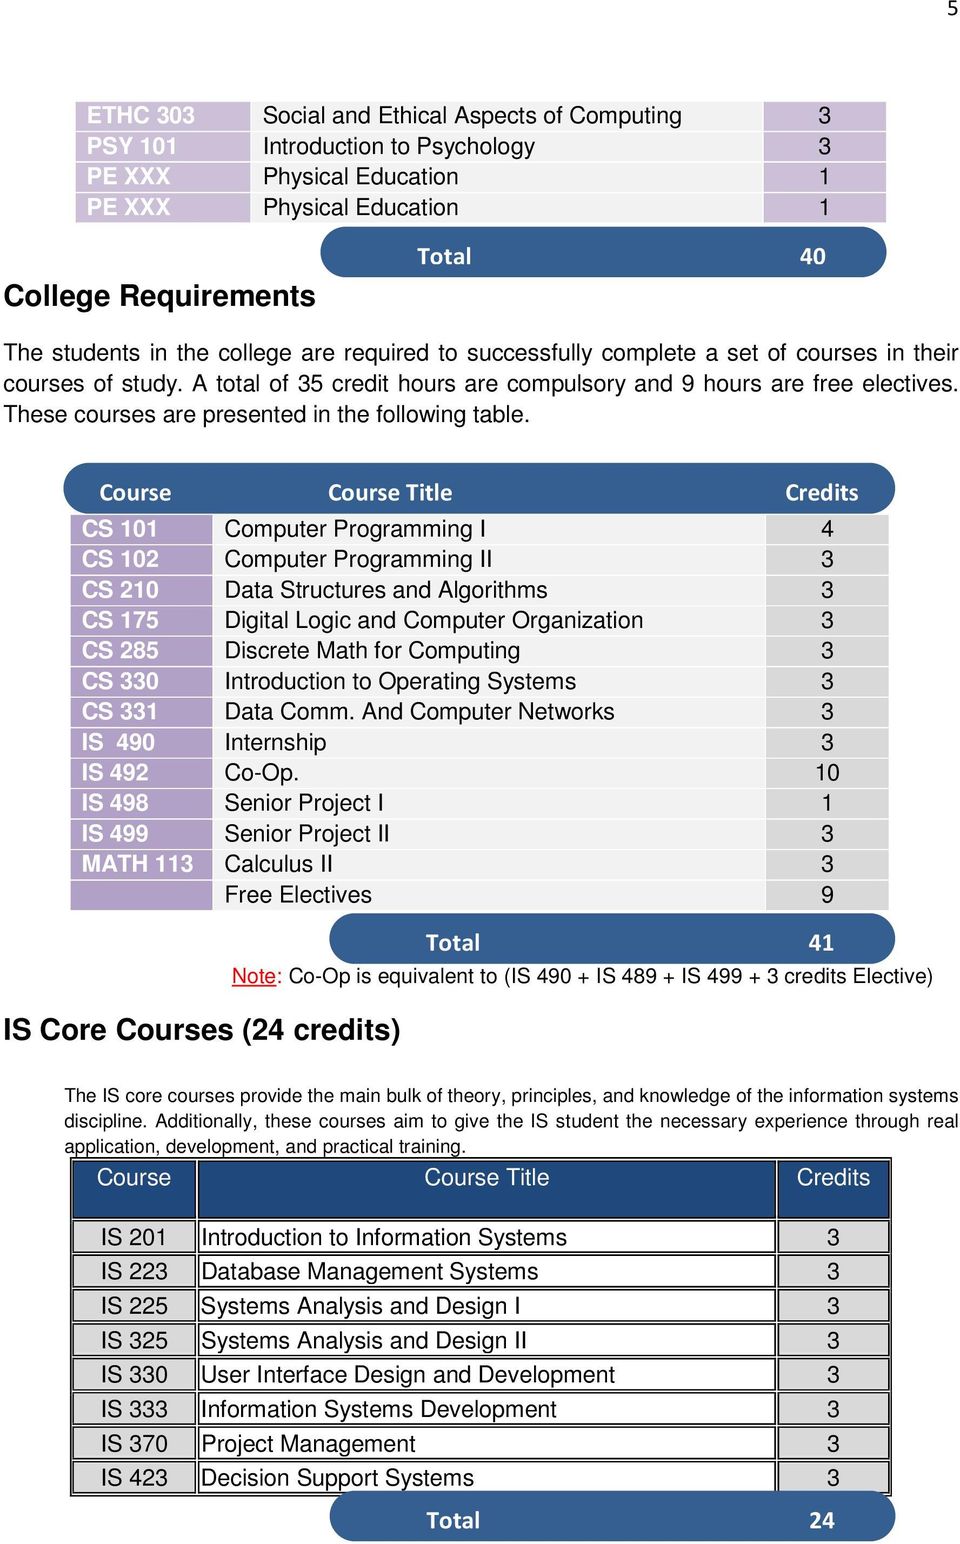 These courses are presented in the following table.